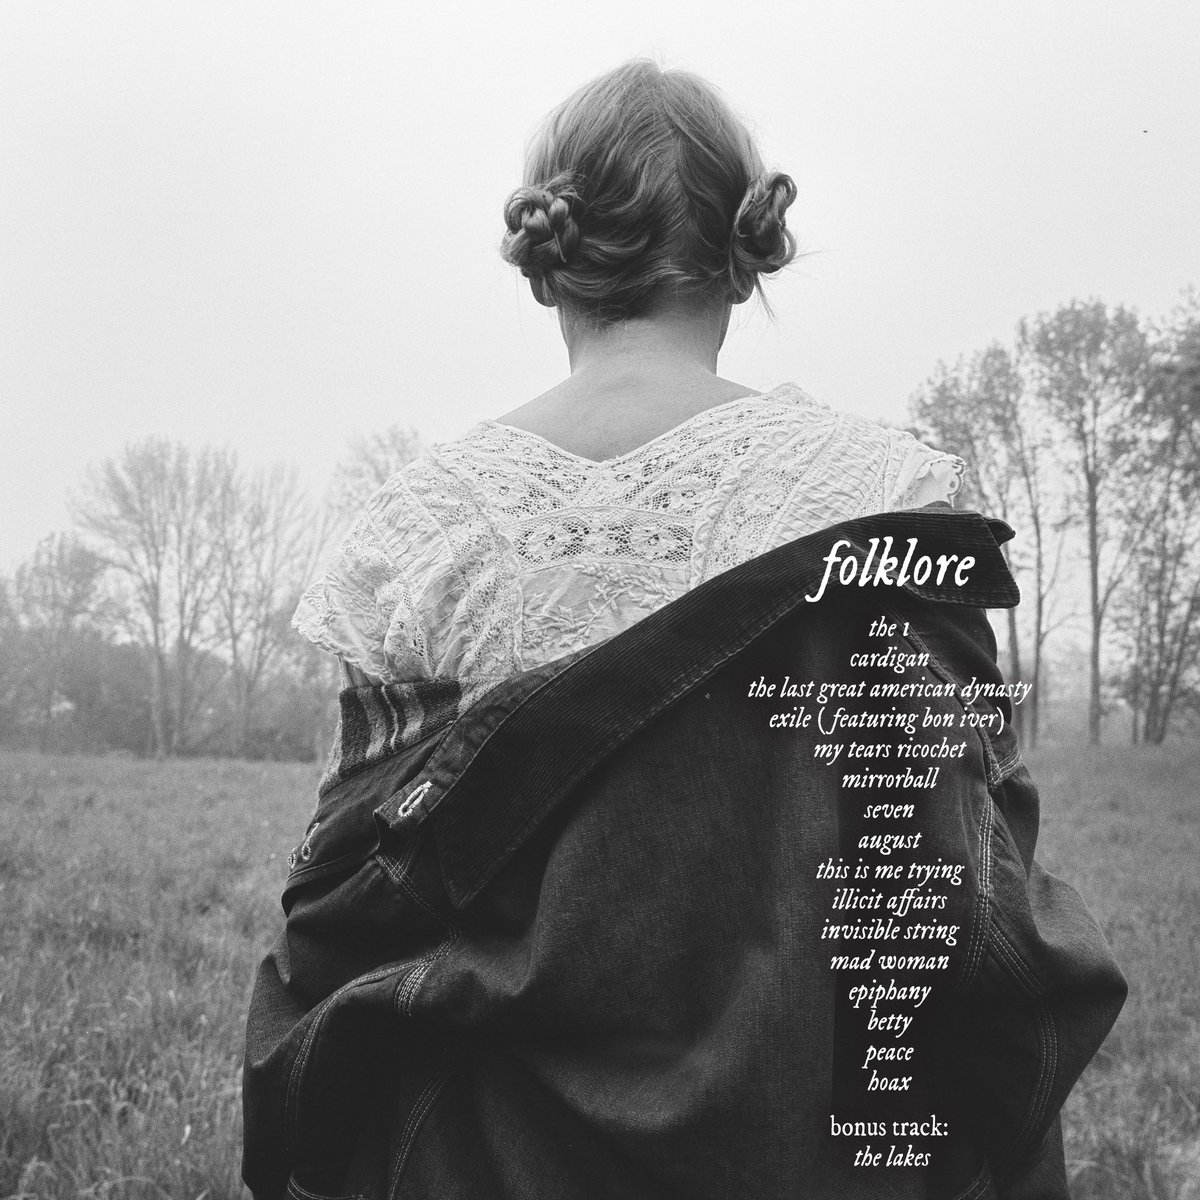 folklore will have 16 songs on the standard edition, but the physical deluxe editions will include a bonus track “the lakes.” Because this is my 8th studio album, I made 8 deluxe CDs & 8 deluxe vinyls available for 1 week😄 Each has unique covers & photos store.taylorswift.com